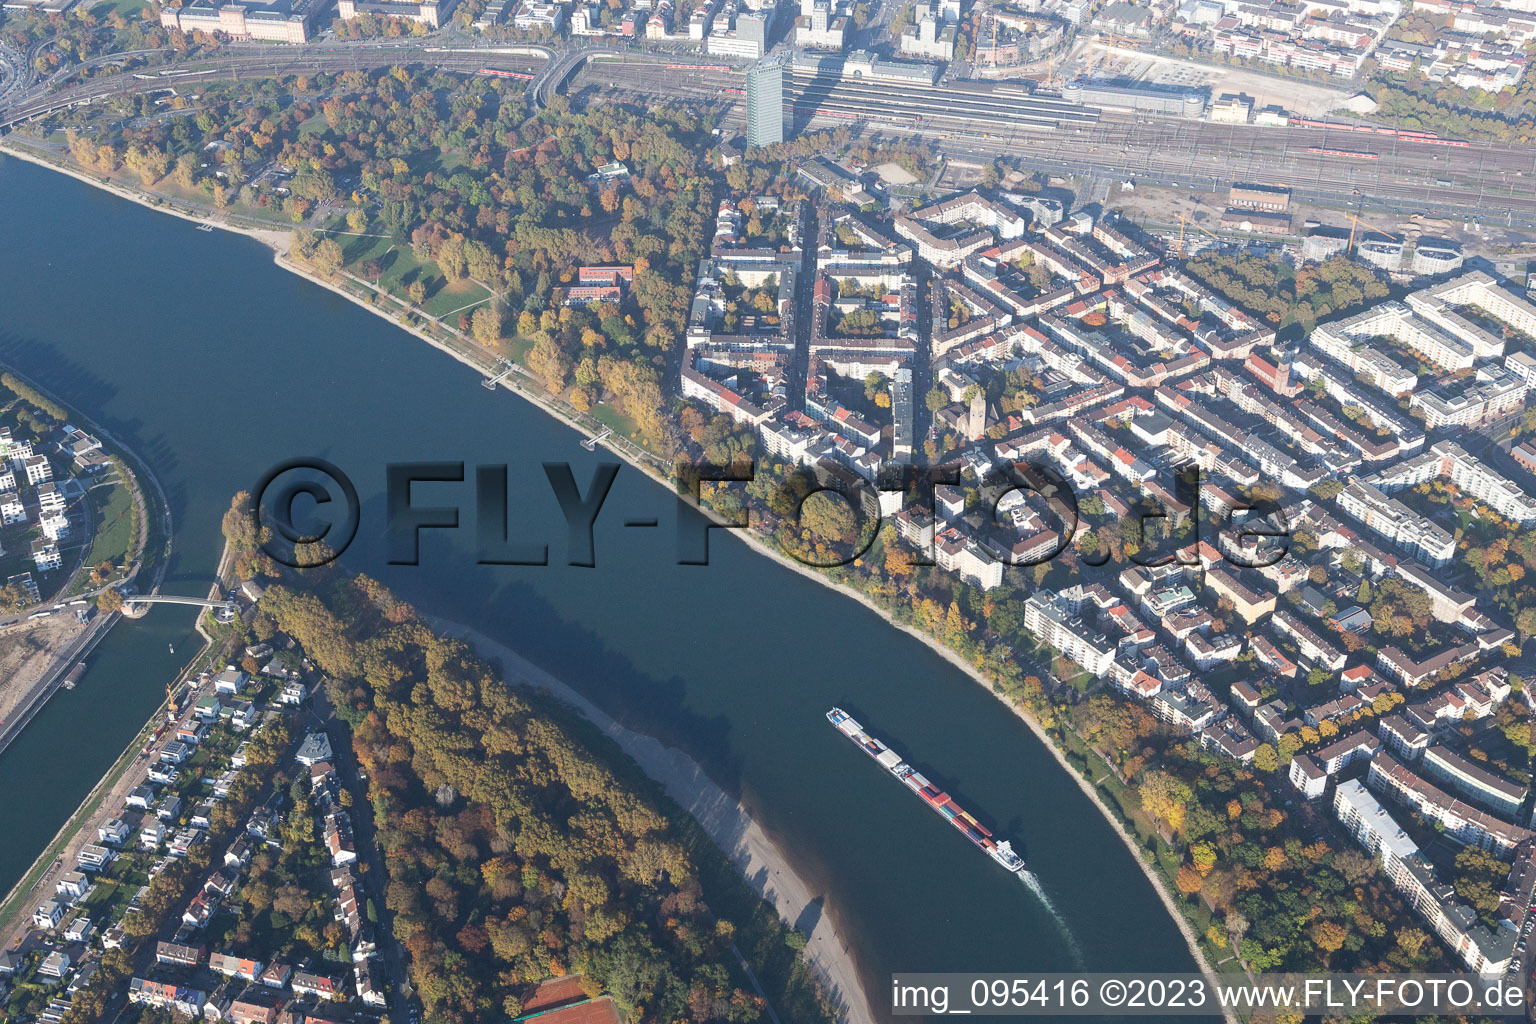 Aerial view of Stephanie bank in the district Lindenhof in Mannheim in the state Baden-Wuerttemberg, Germany